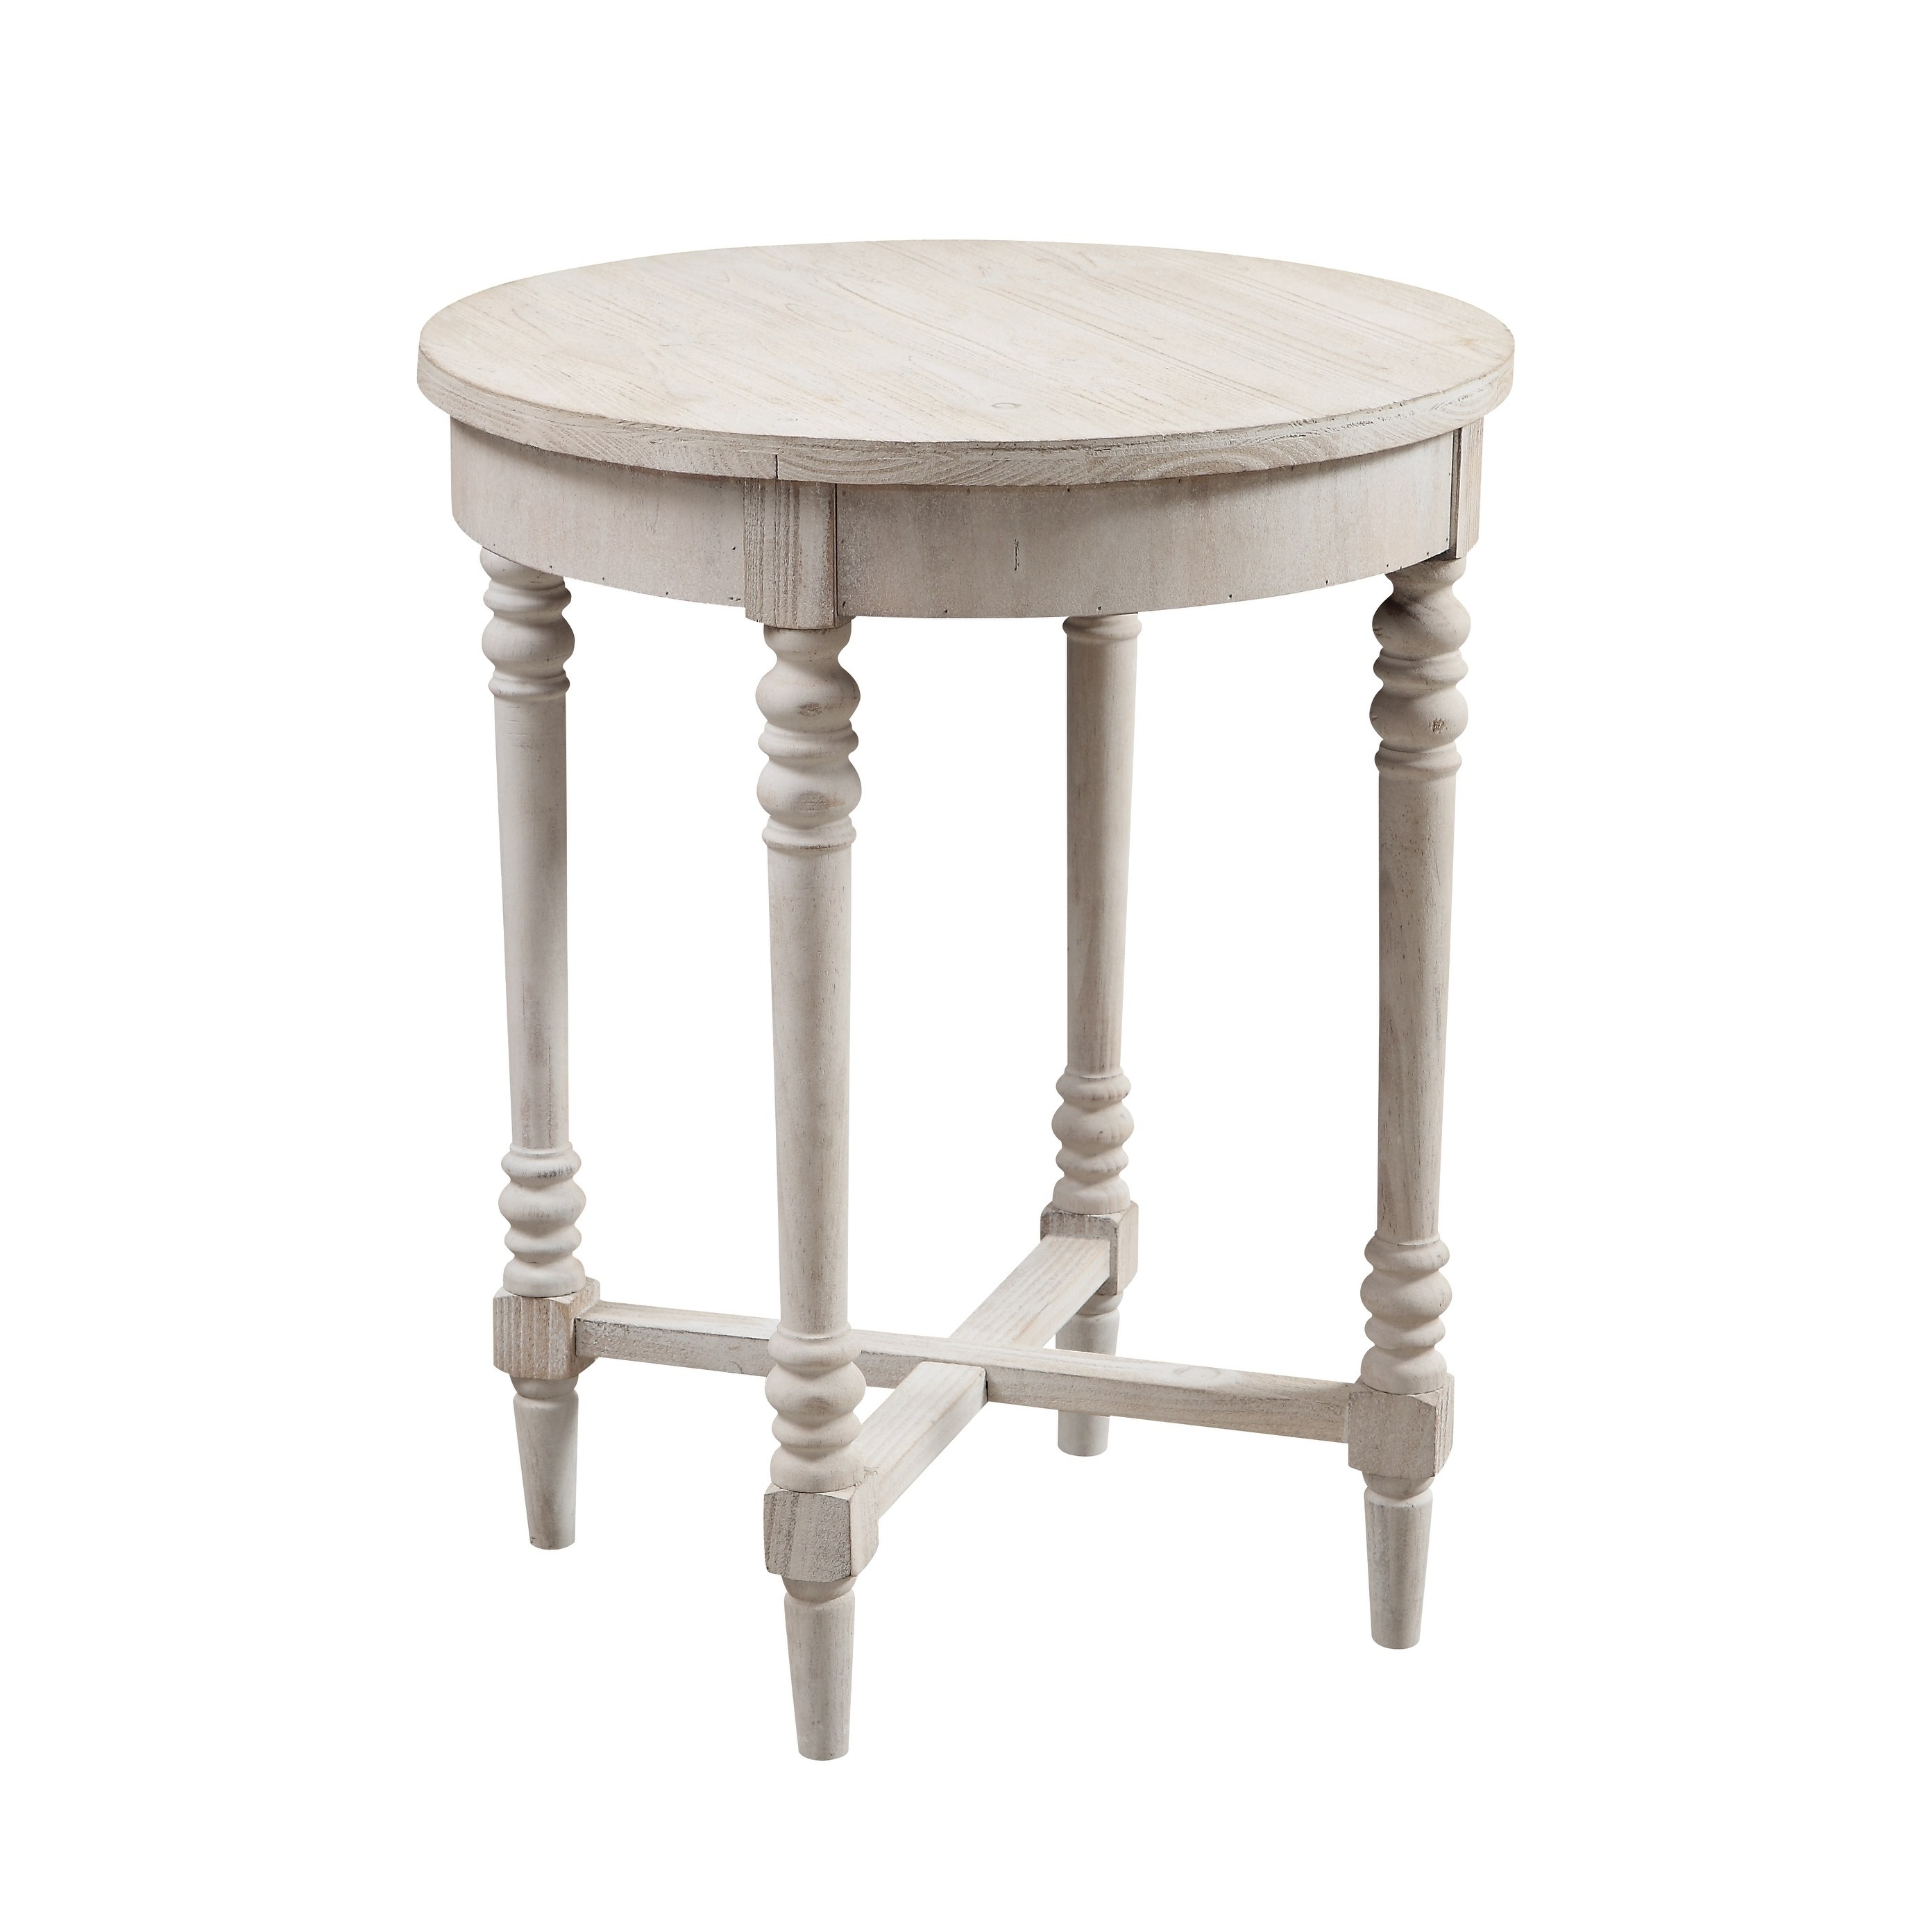 treasure trove small accent table free shipping today end antique victorian marble top tables carpet door threshold furniture reviews ikea wooden storage bench college dorm stuff